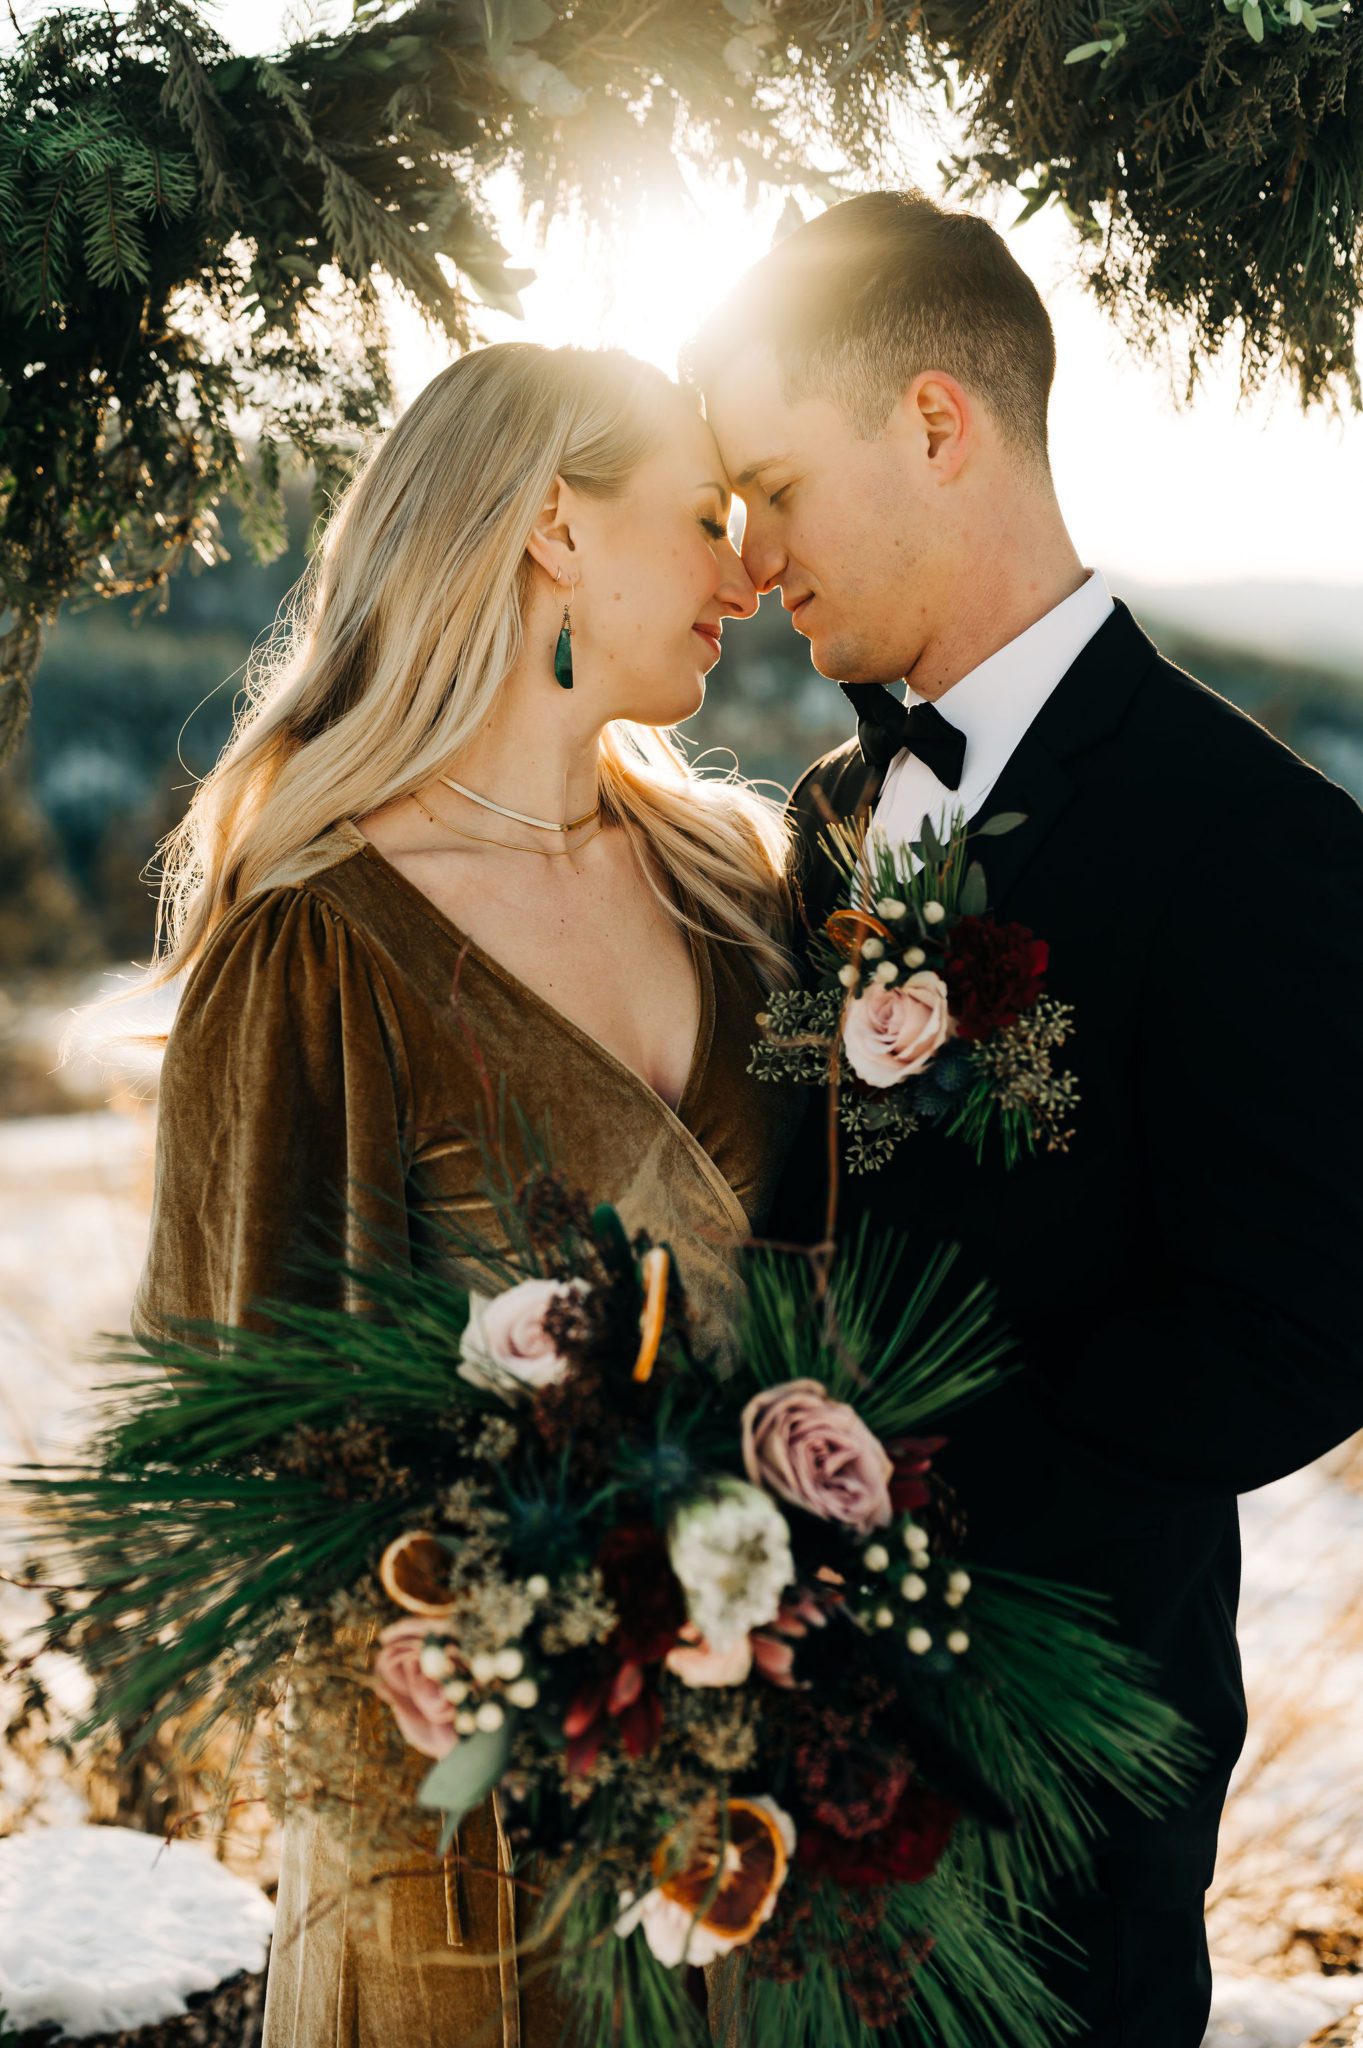 Pine and candied orange bouquet at this golden hour elopement, winter outdoor wedding inspiration